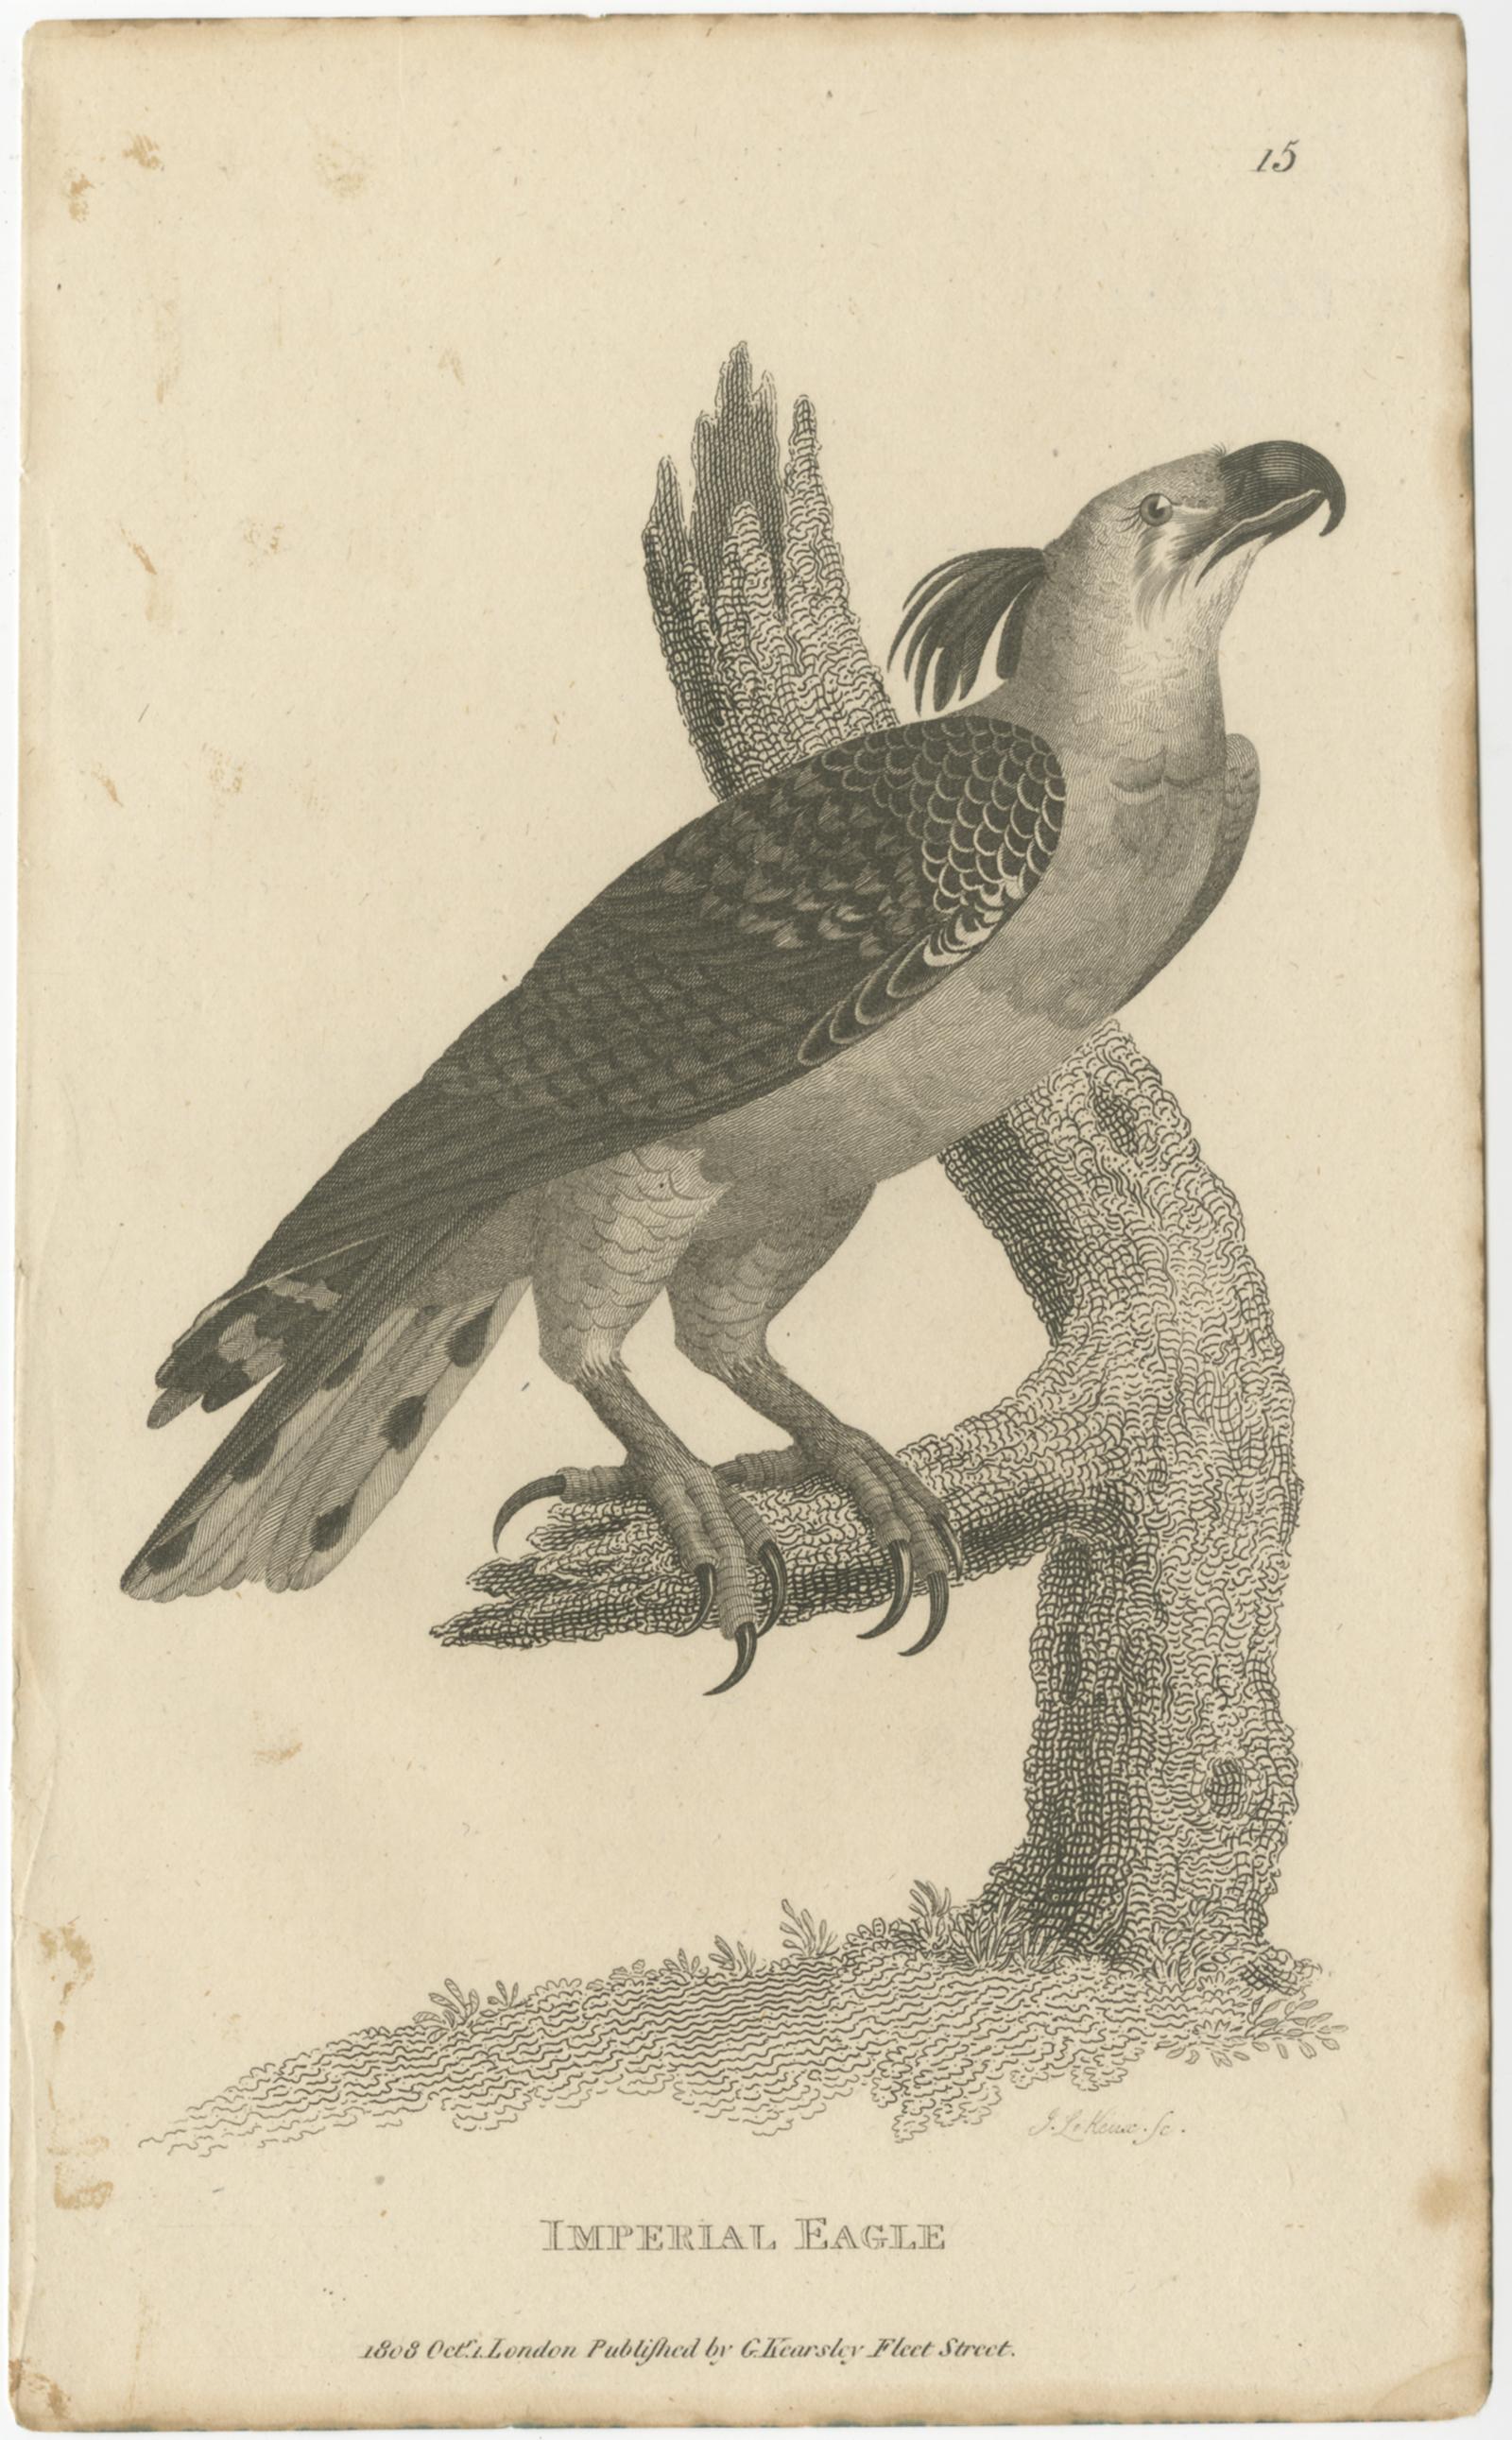 Set of two antique bird prints titled 'Imperial Eagle' and 'Auriculated Vulture'. Lithographs showing the imperial eagle and turkey vulture. These prints originates from volume 7 of 'General Zoology: or Systematic Natural History' by G. Shaw.